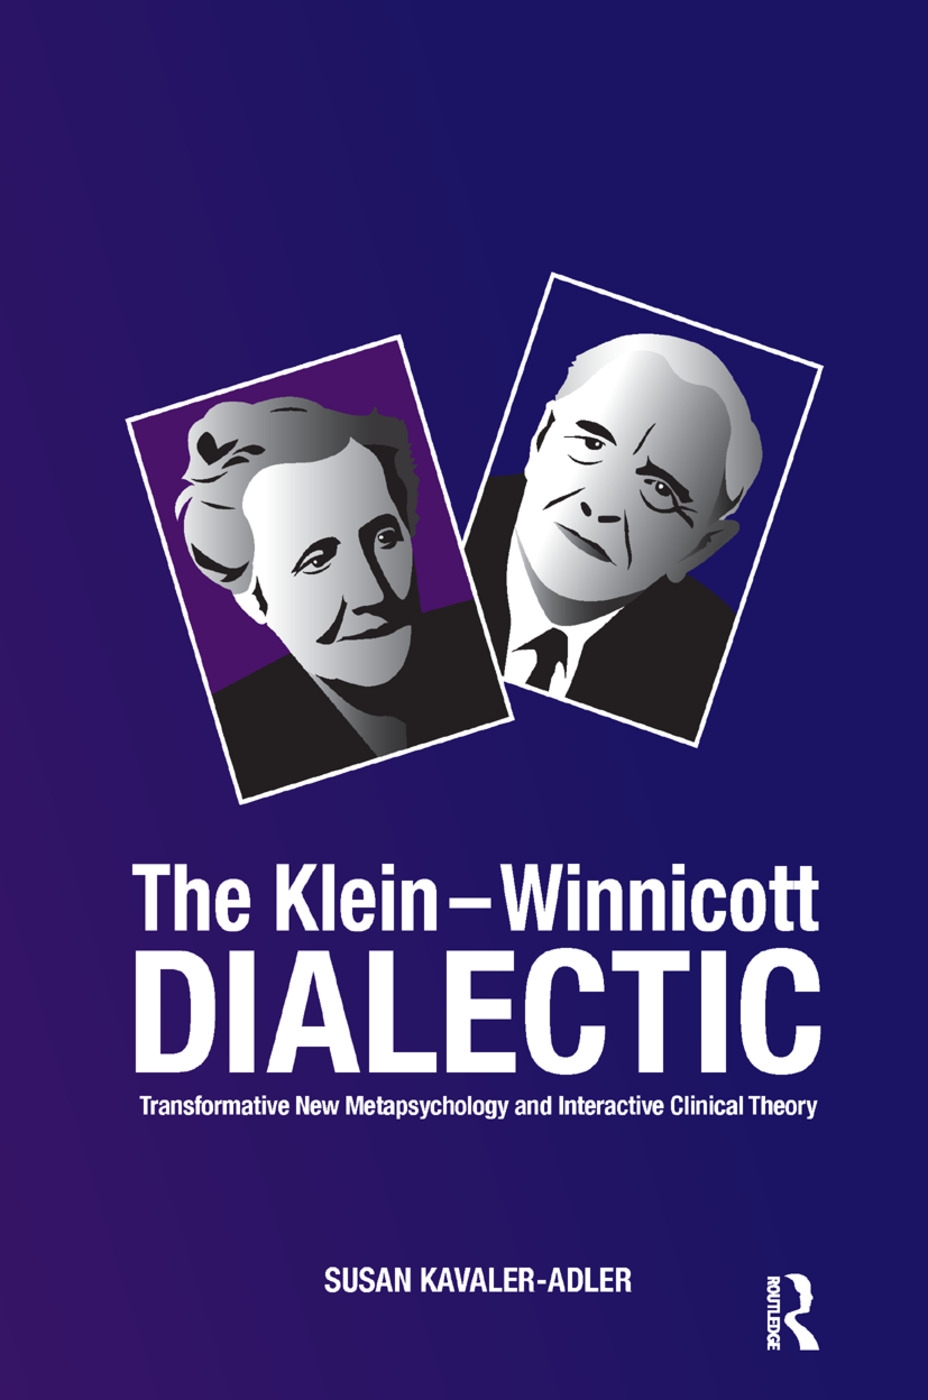 The Klein-Winnicot Dialectic: Transformative New Metapsychology and Interactive Clinical Theory